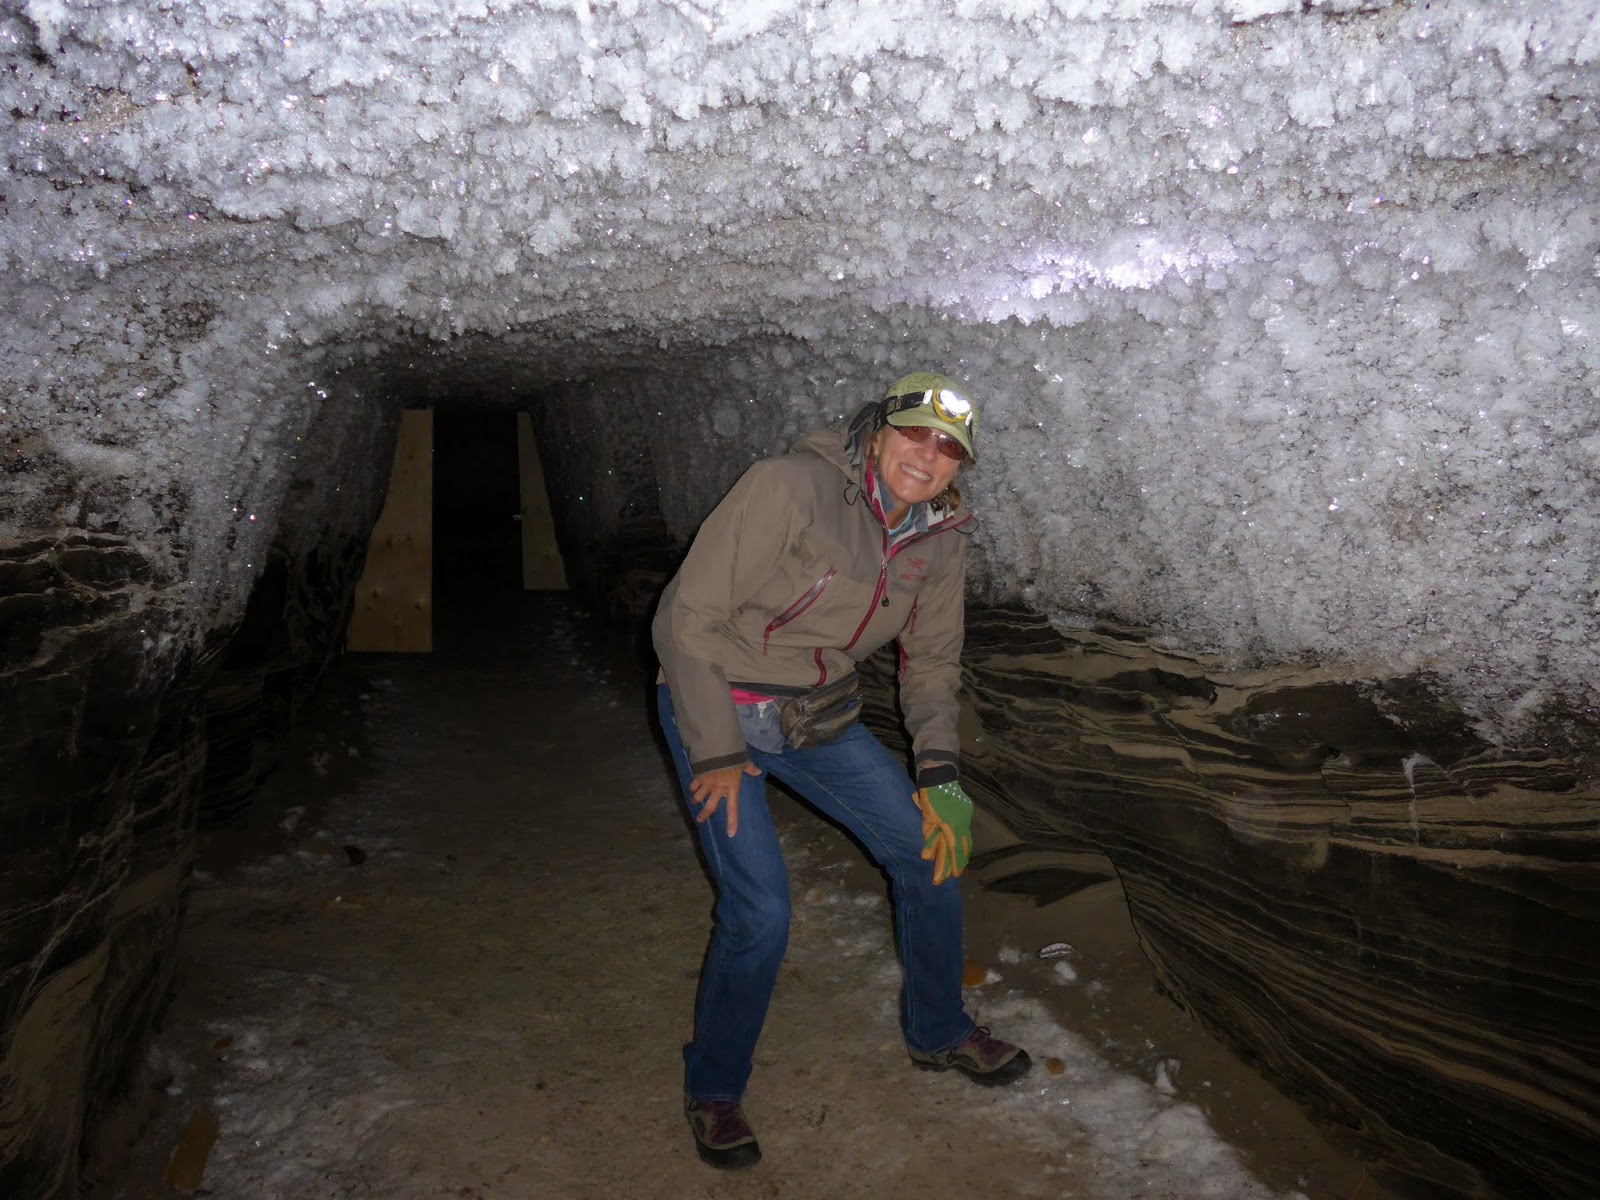 Liz 30 feet below the surface in the ice house. Ice everywhere.